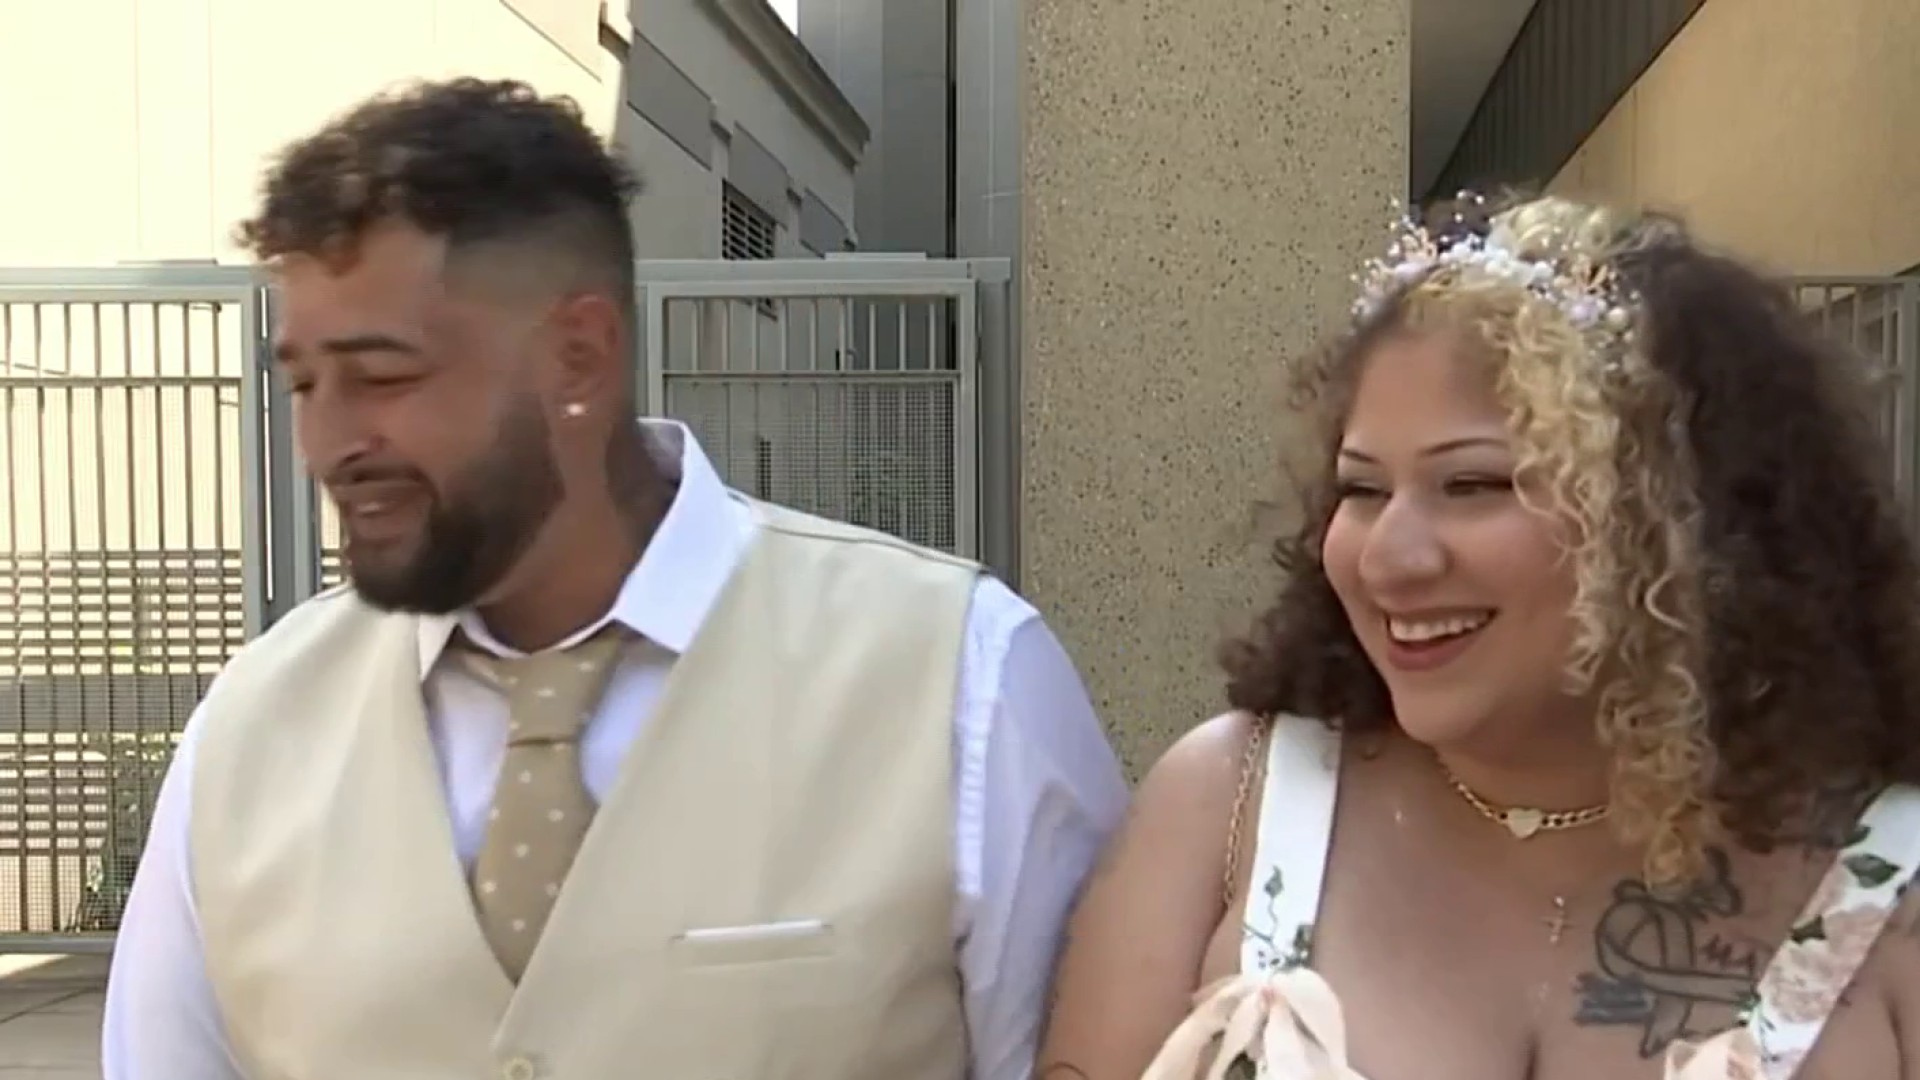 Amid a global glitch, couple gets hitched outside Rockville courthouse